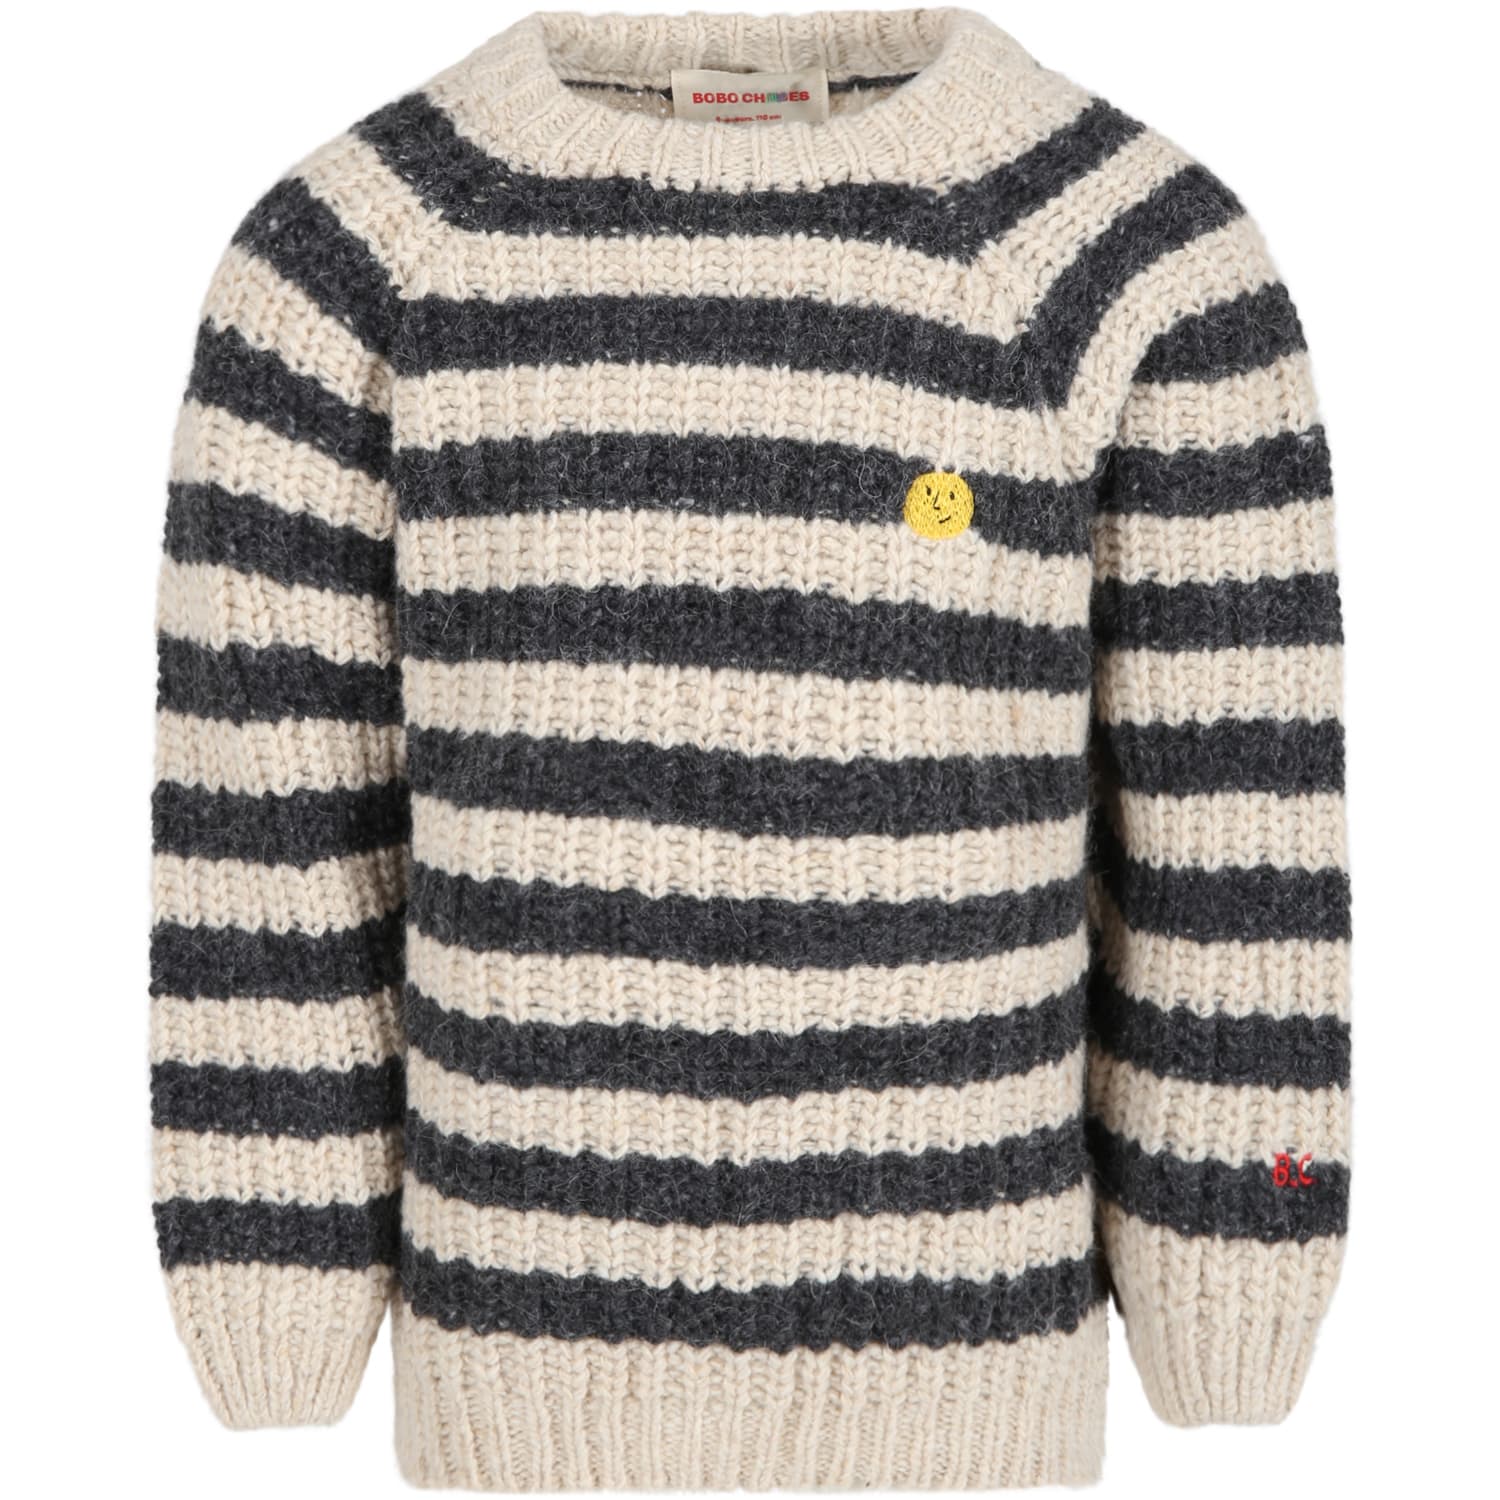 Bobo Choses Multicolor Sweater For Kids With Yellow Smiley